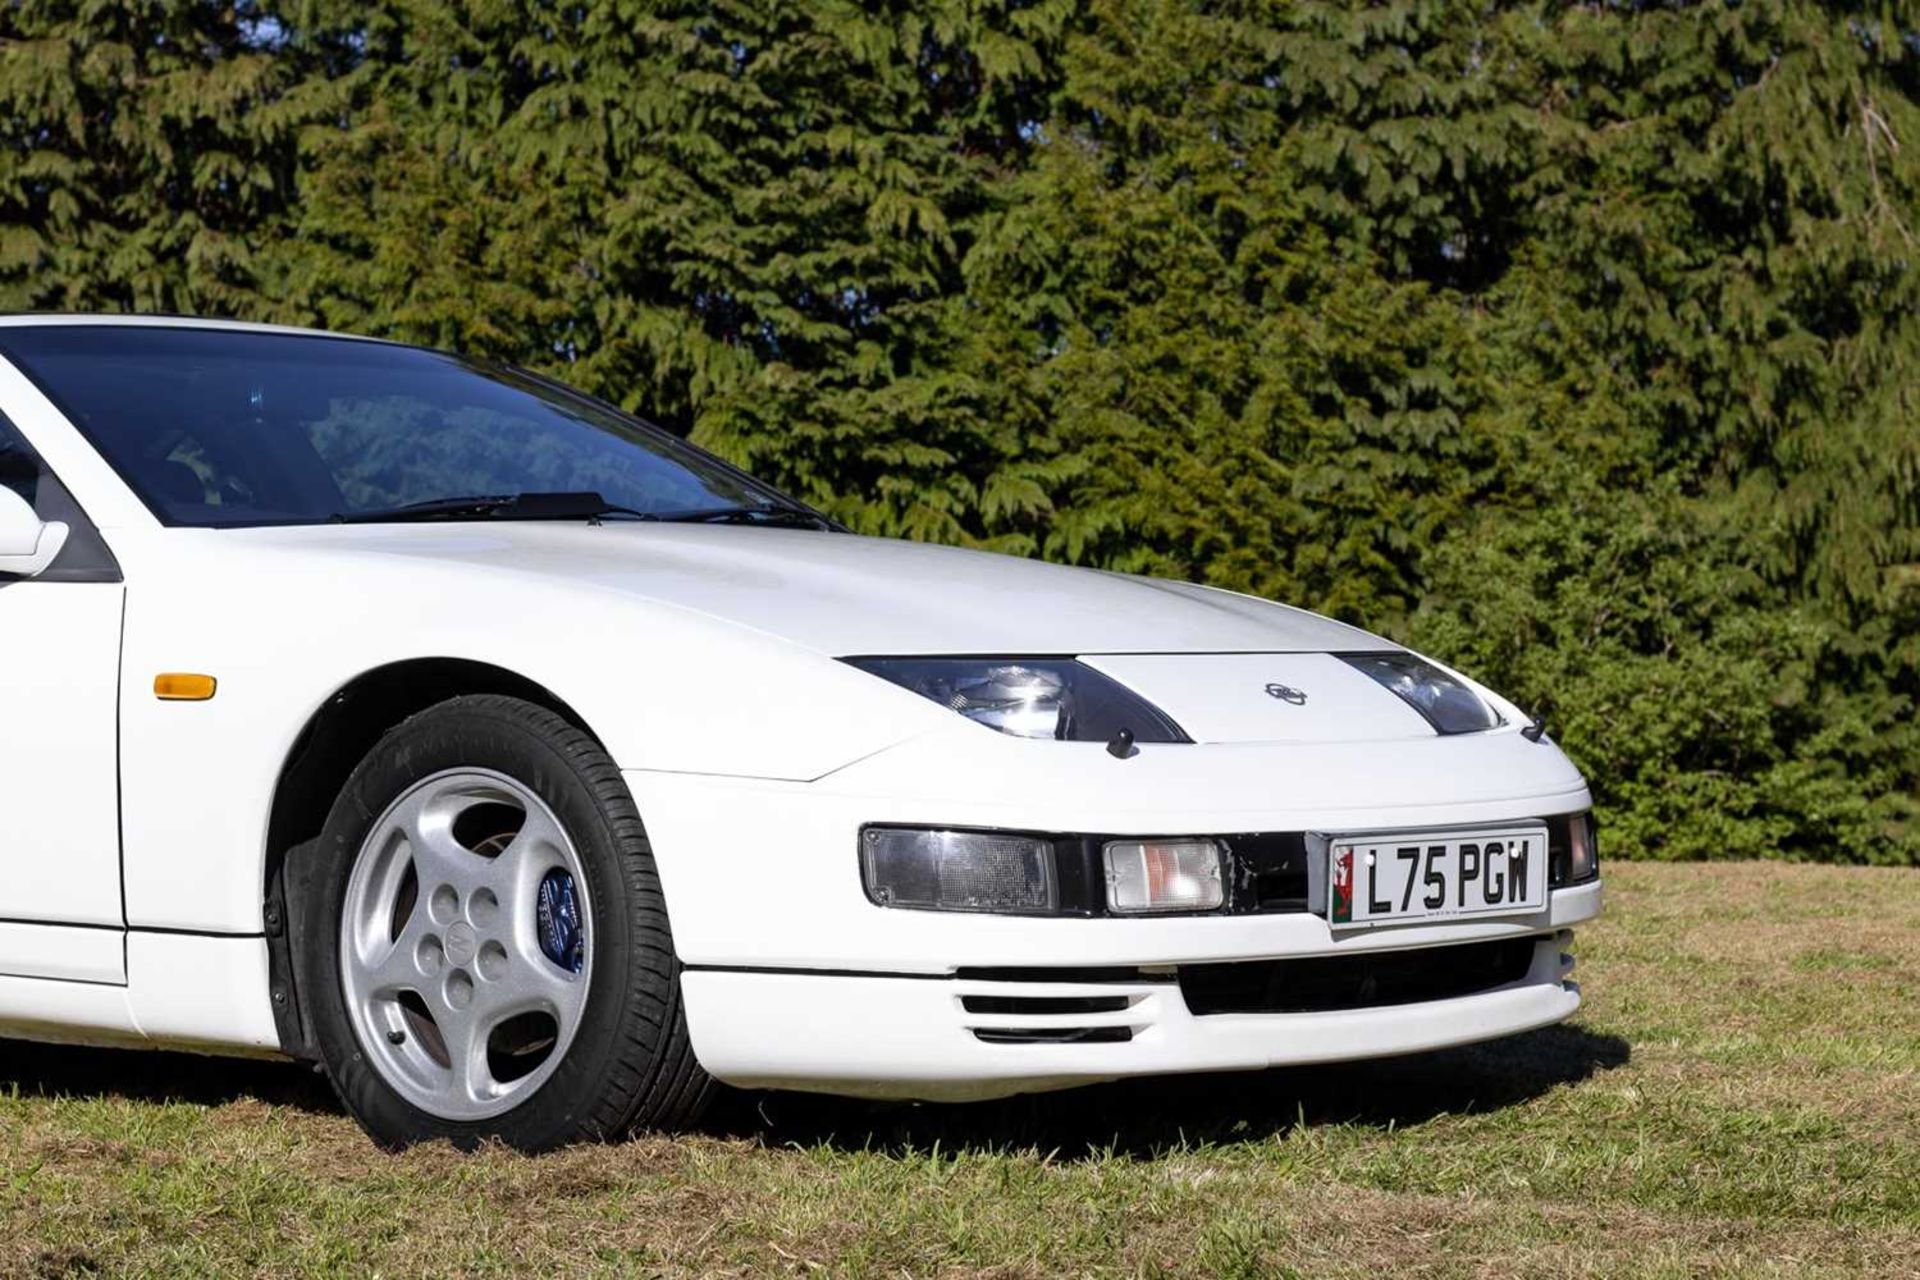 1990 Nissan 300ZX Turbo 2+2 Targa One of the last examples registered in the UK - Image 32 of 89